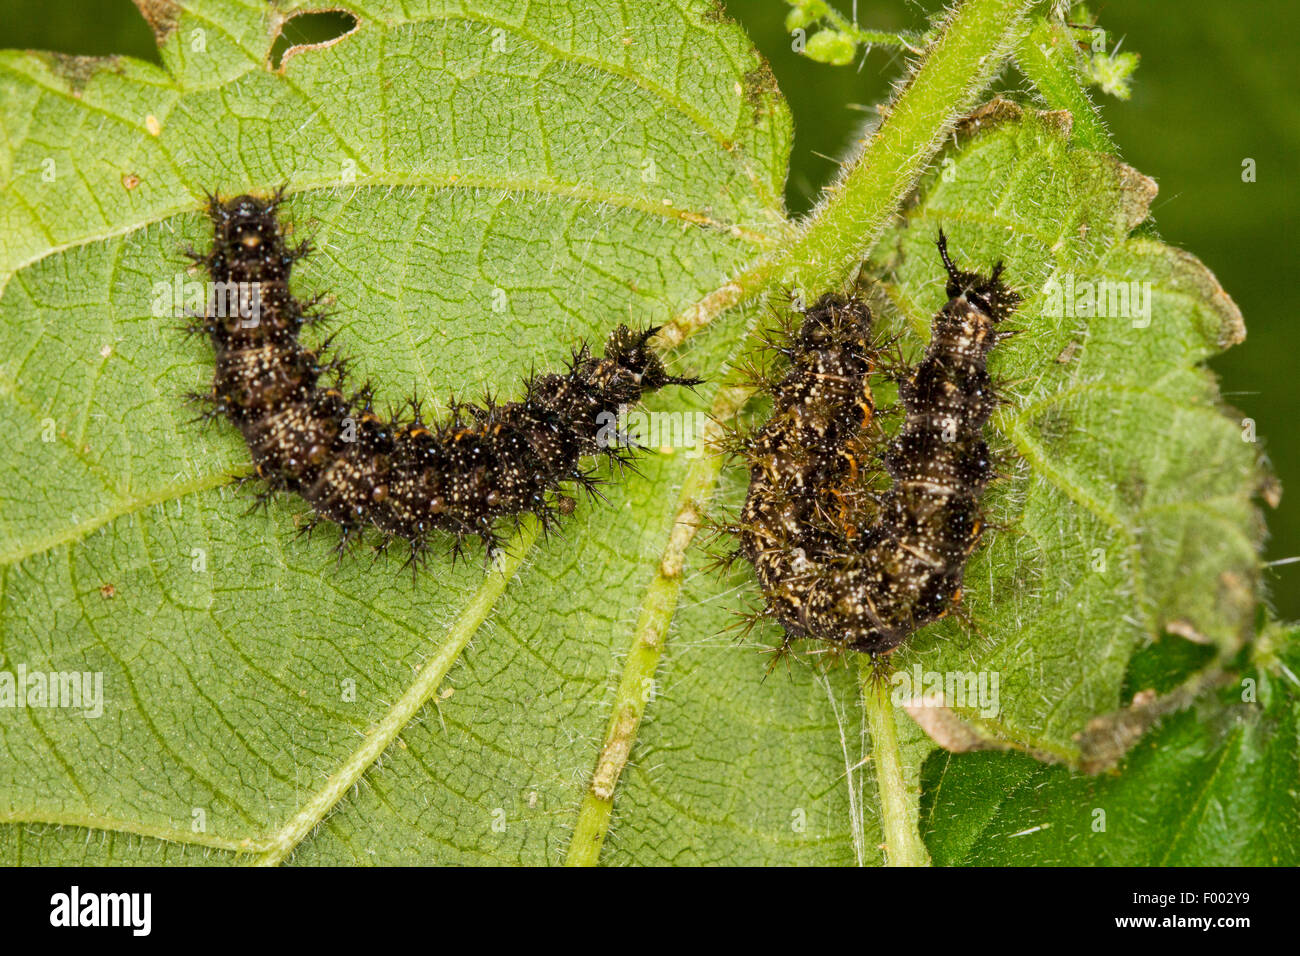 map butterfly (Araschnia levana), two map butterfly caterpillars on a stinging nettle, Germany, Mecklenburg-Western Pomerania Stock Photo